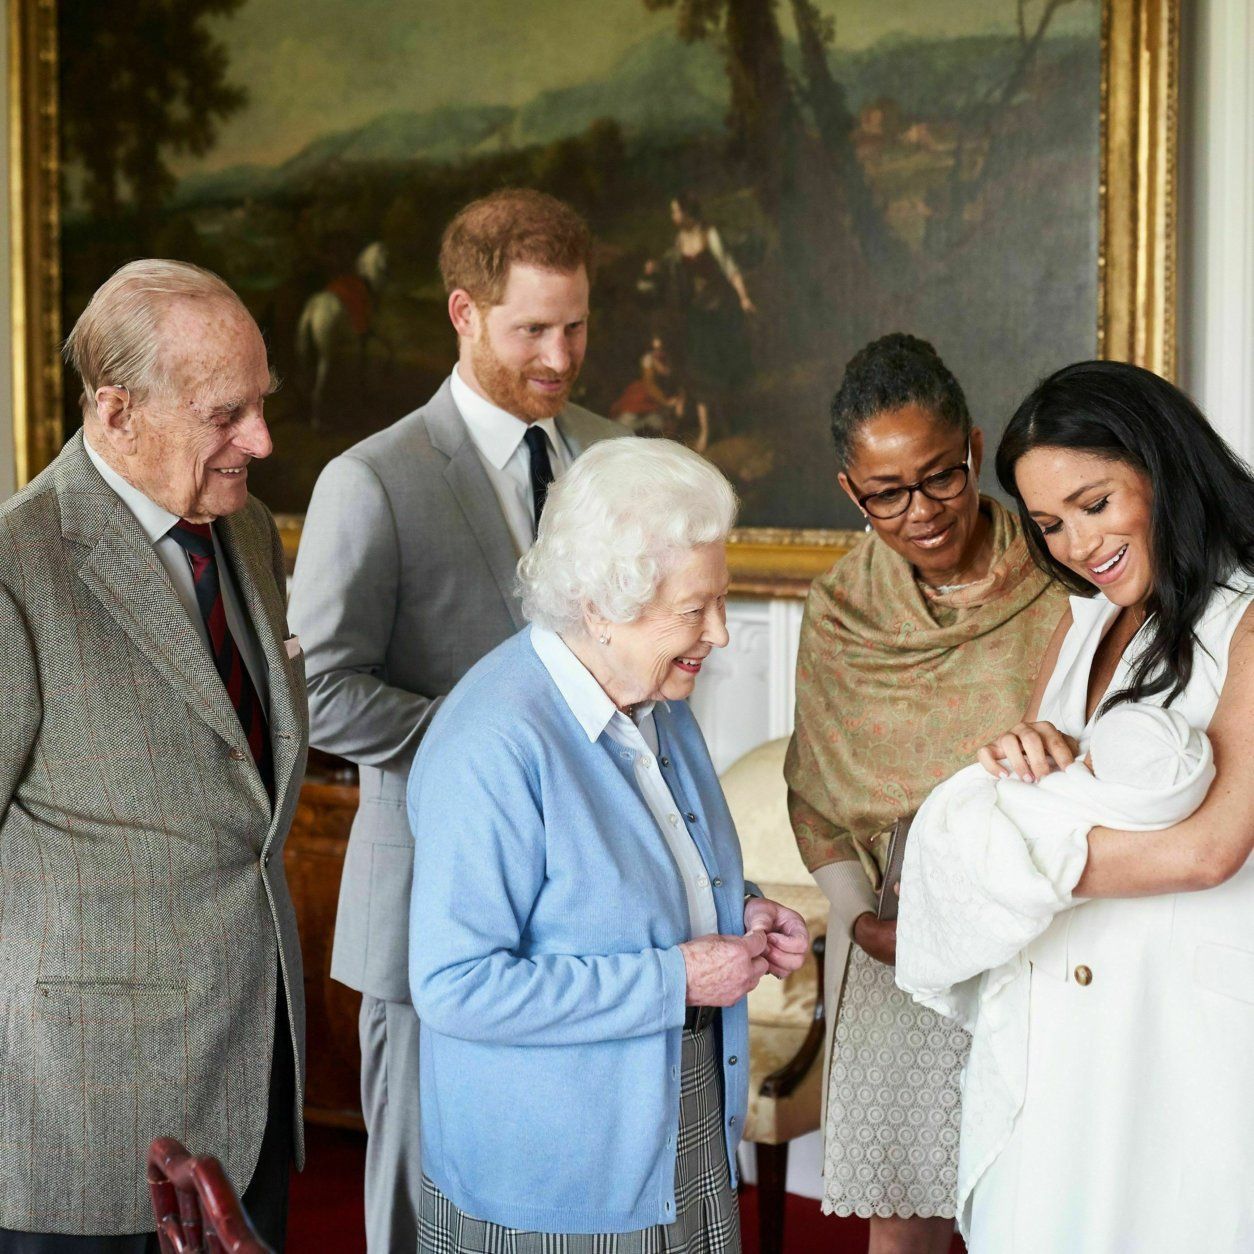 In this image made available by SussexRoyal on Wednesday May 8, 2019, Britain's Prince Harry and Meghan, Duchess of Sussex, joined by her mother Doria Ragland, show their new son to Queen Elizabeth II and Prince Philip at Windsor Castle, Windsor, England. Prince Harry and Meghan have named their son Archie Harrison Mountbatten-Windsor. (Chris Allerton/SussexRoyal via AP)